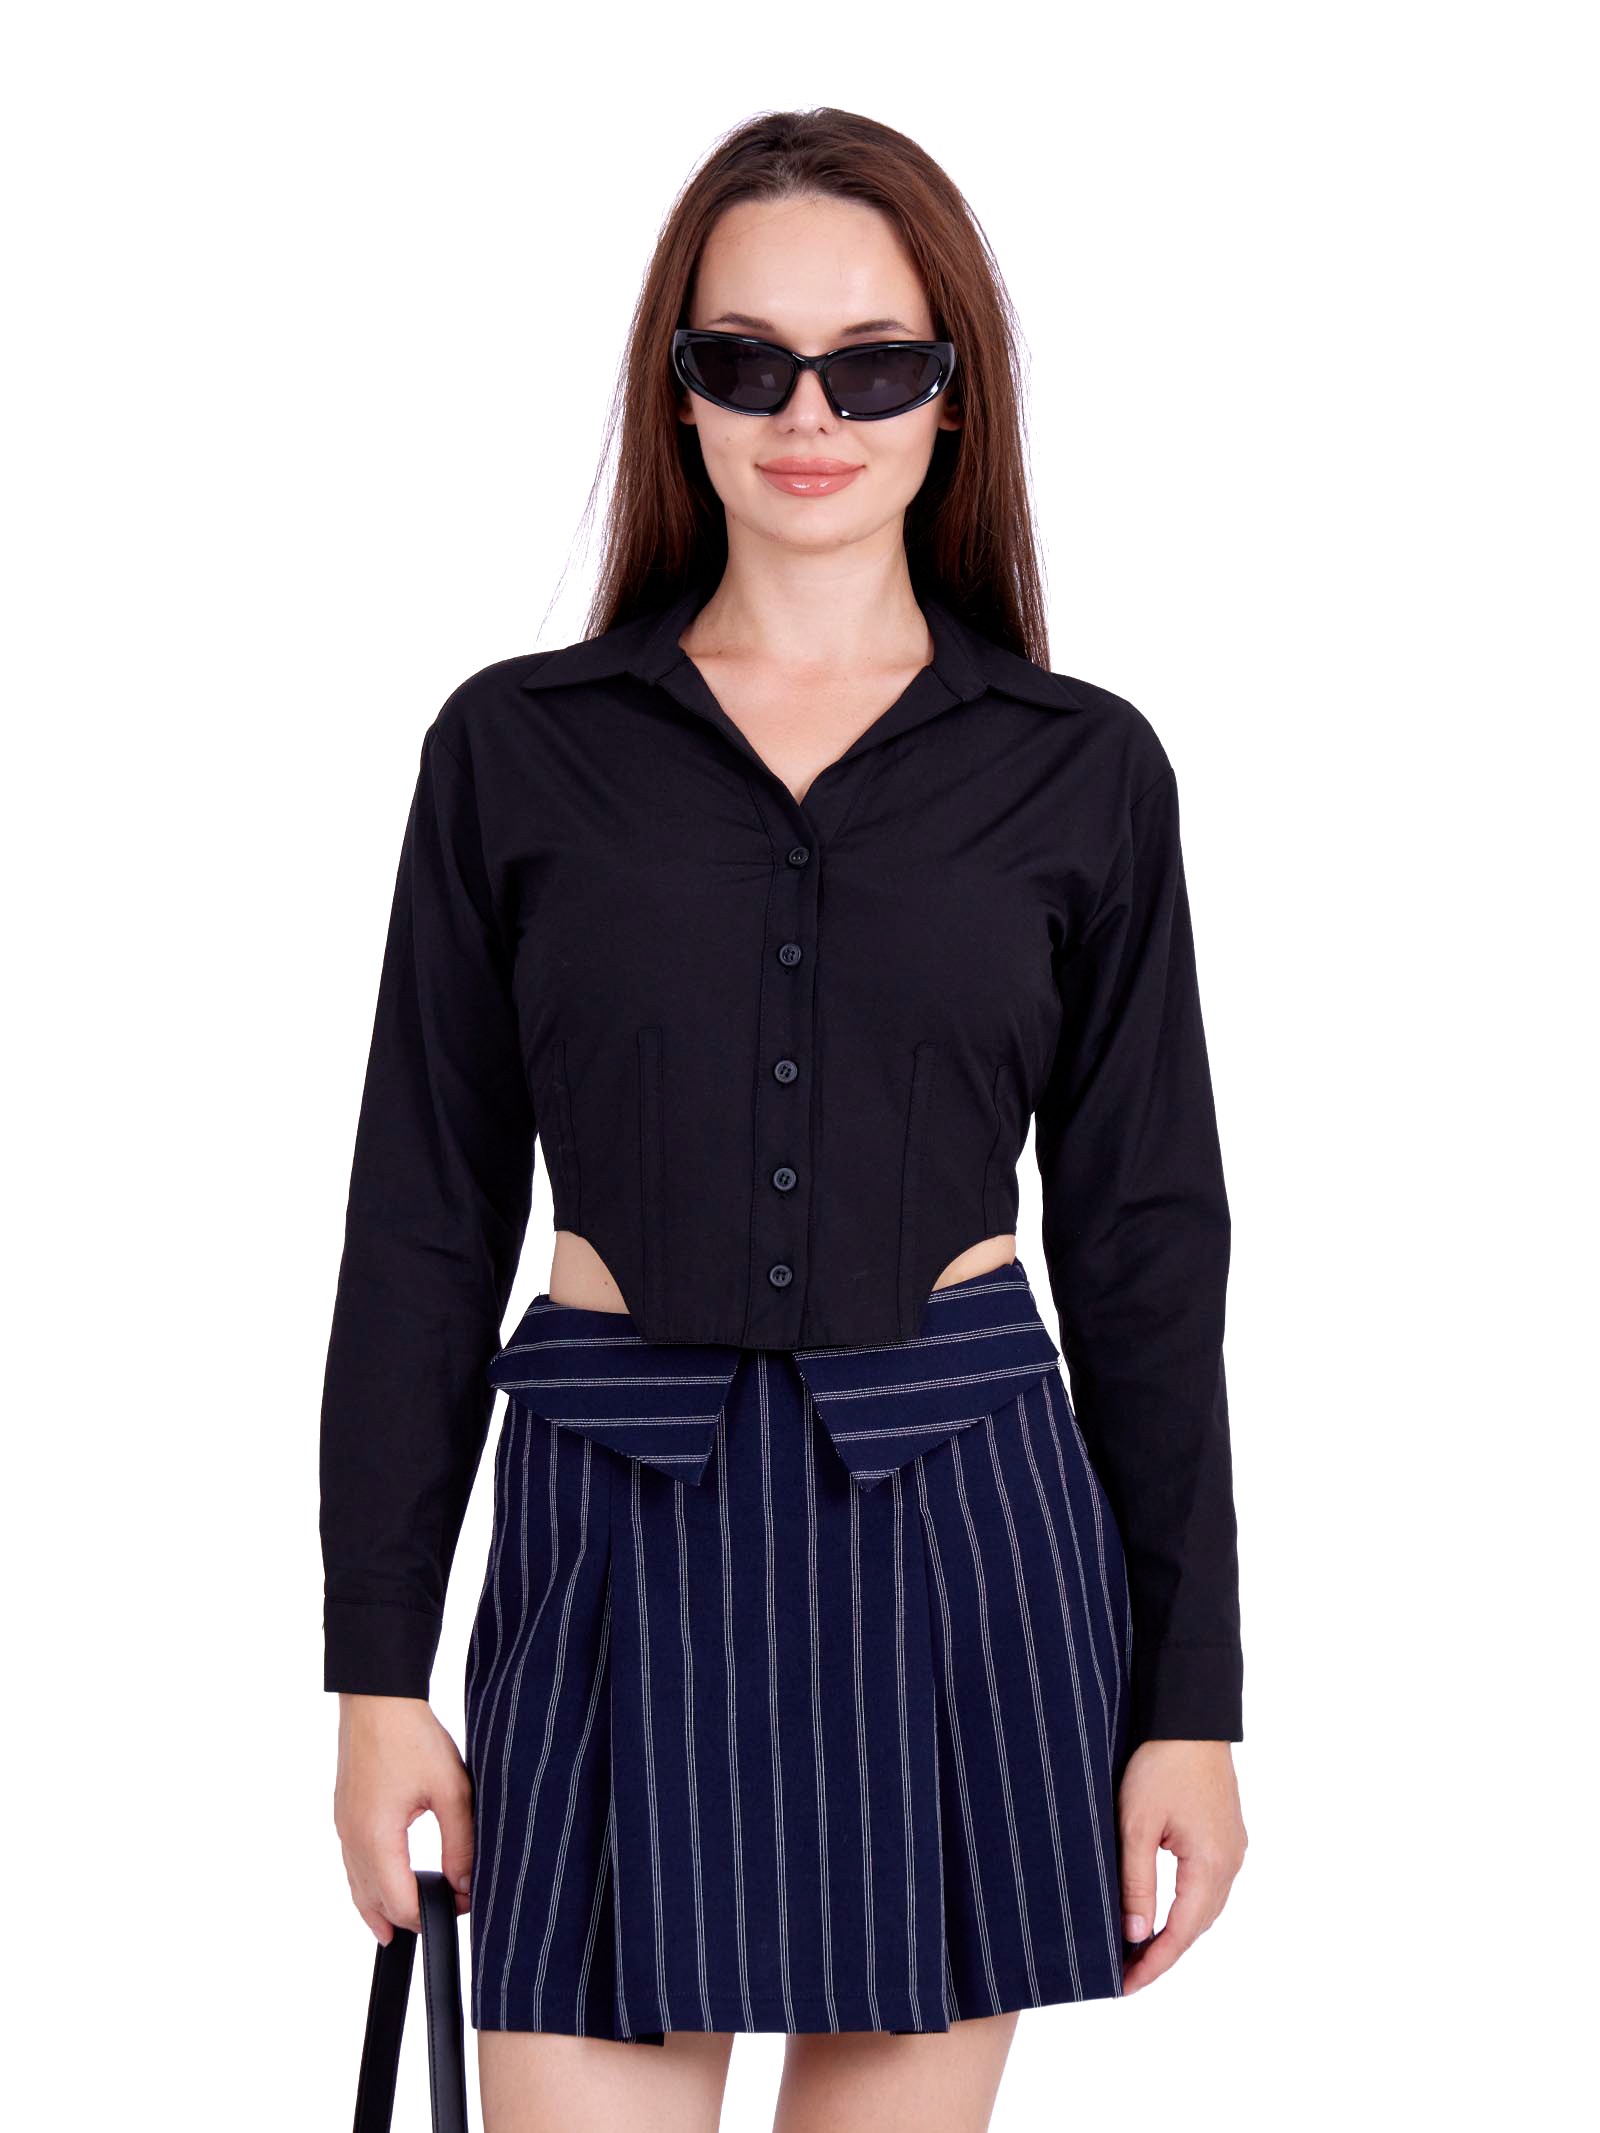 Cropped Black Shirt with imitation of corset